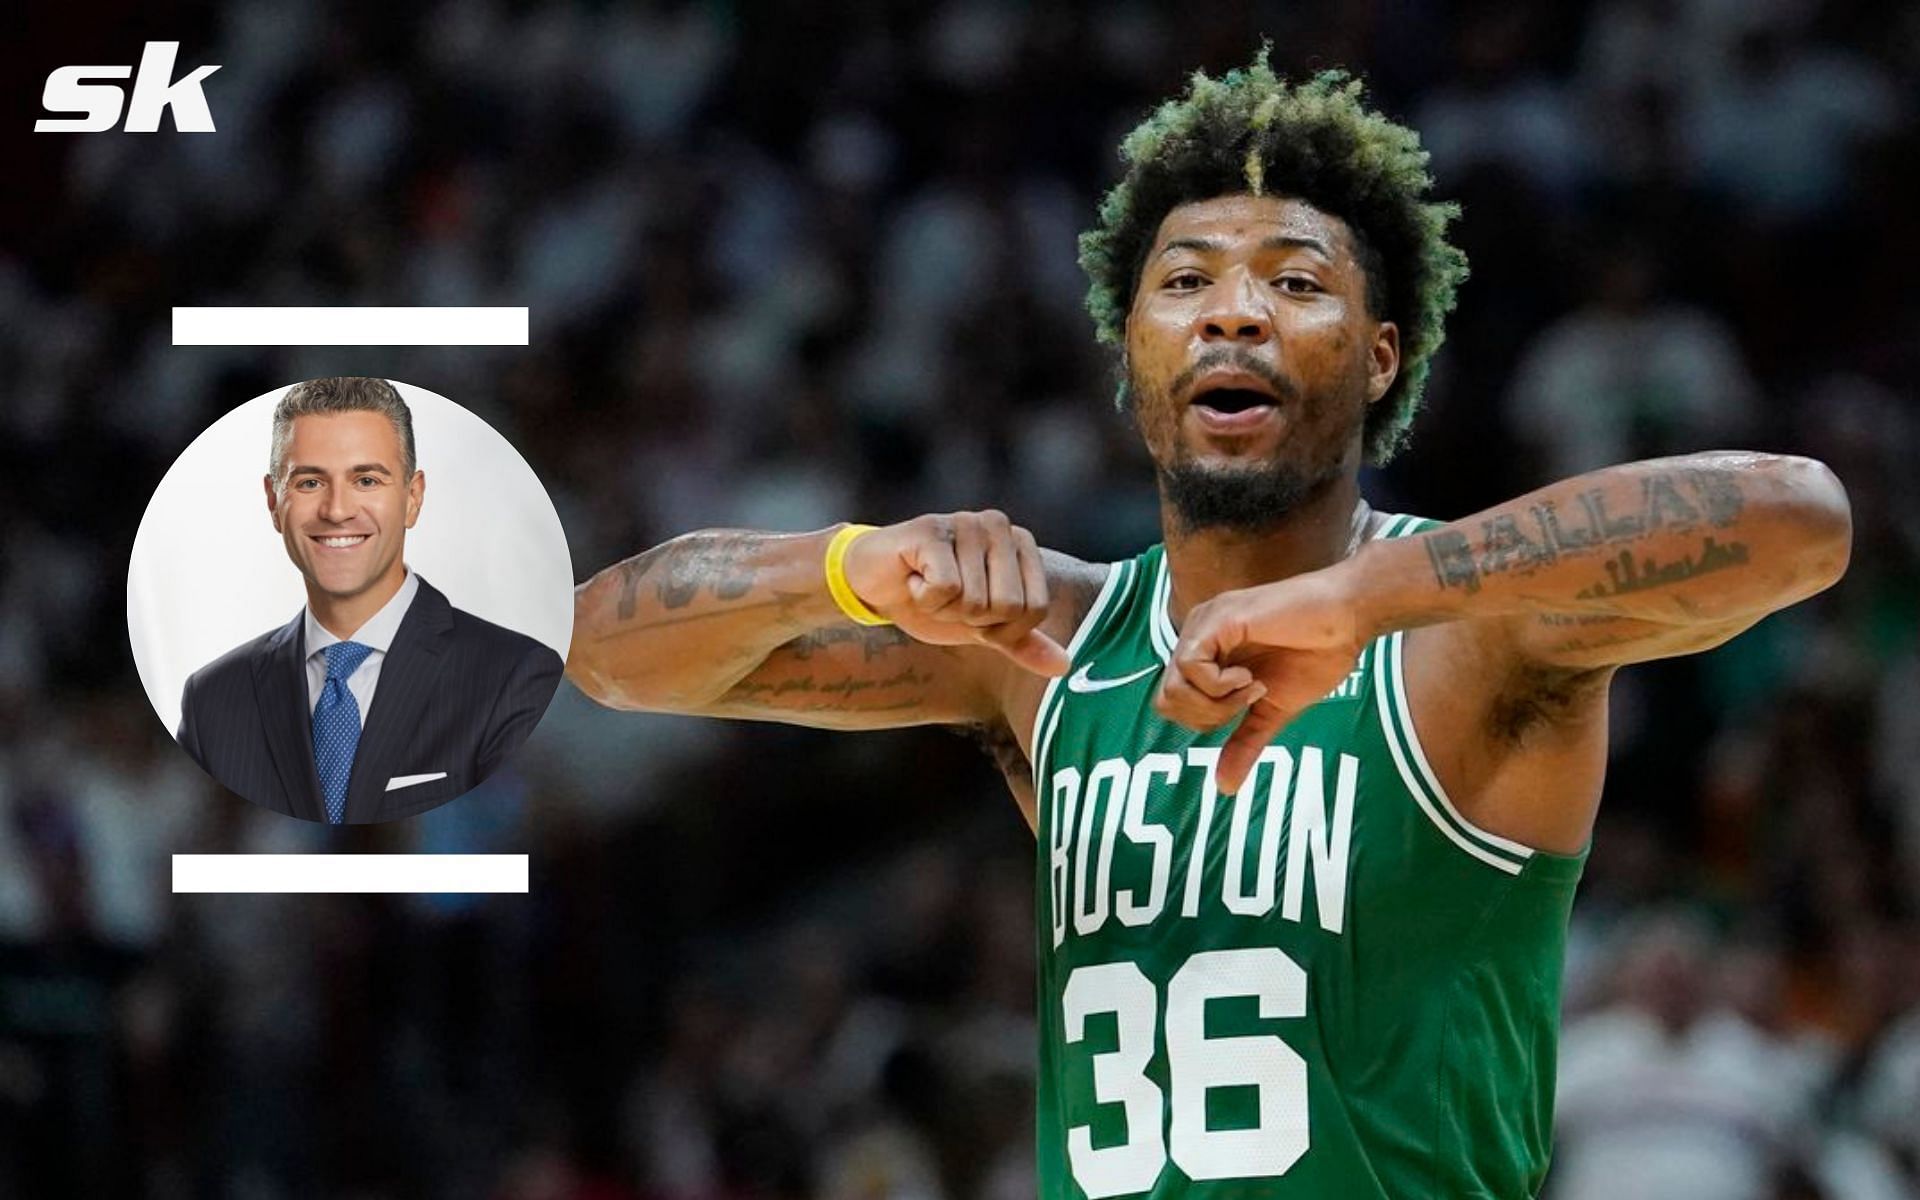 Marcus Smart continues being an influential force at Boston Celtics